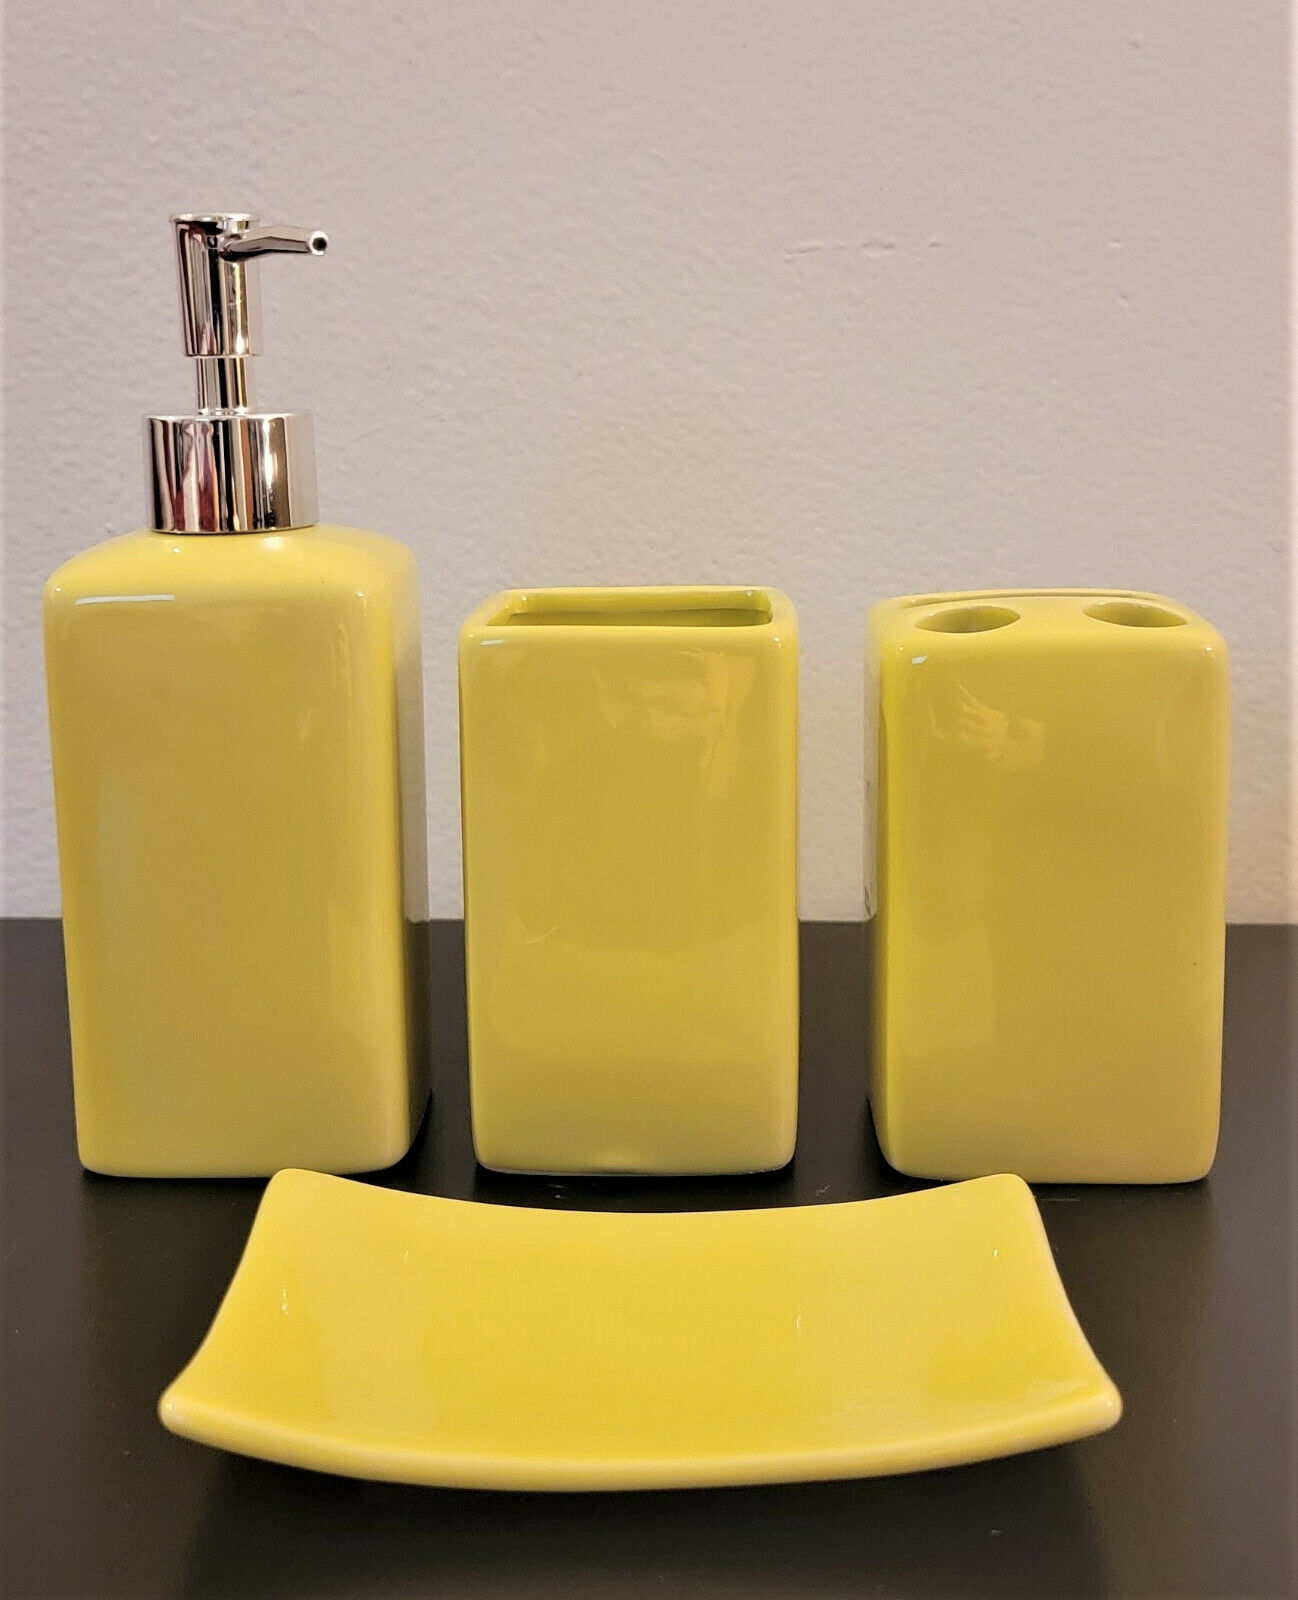 Yellow Mustard Bathroom Accessory Set - 4 Pieces - Fashionable & Practical